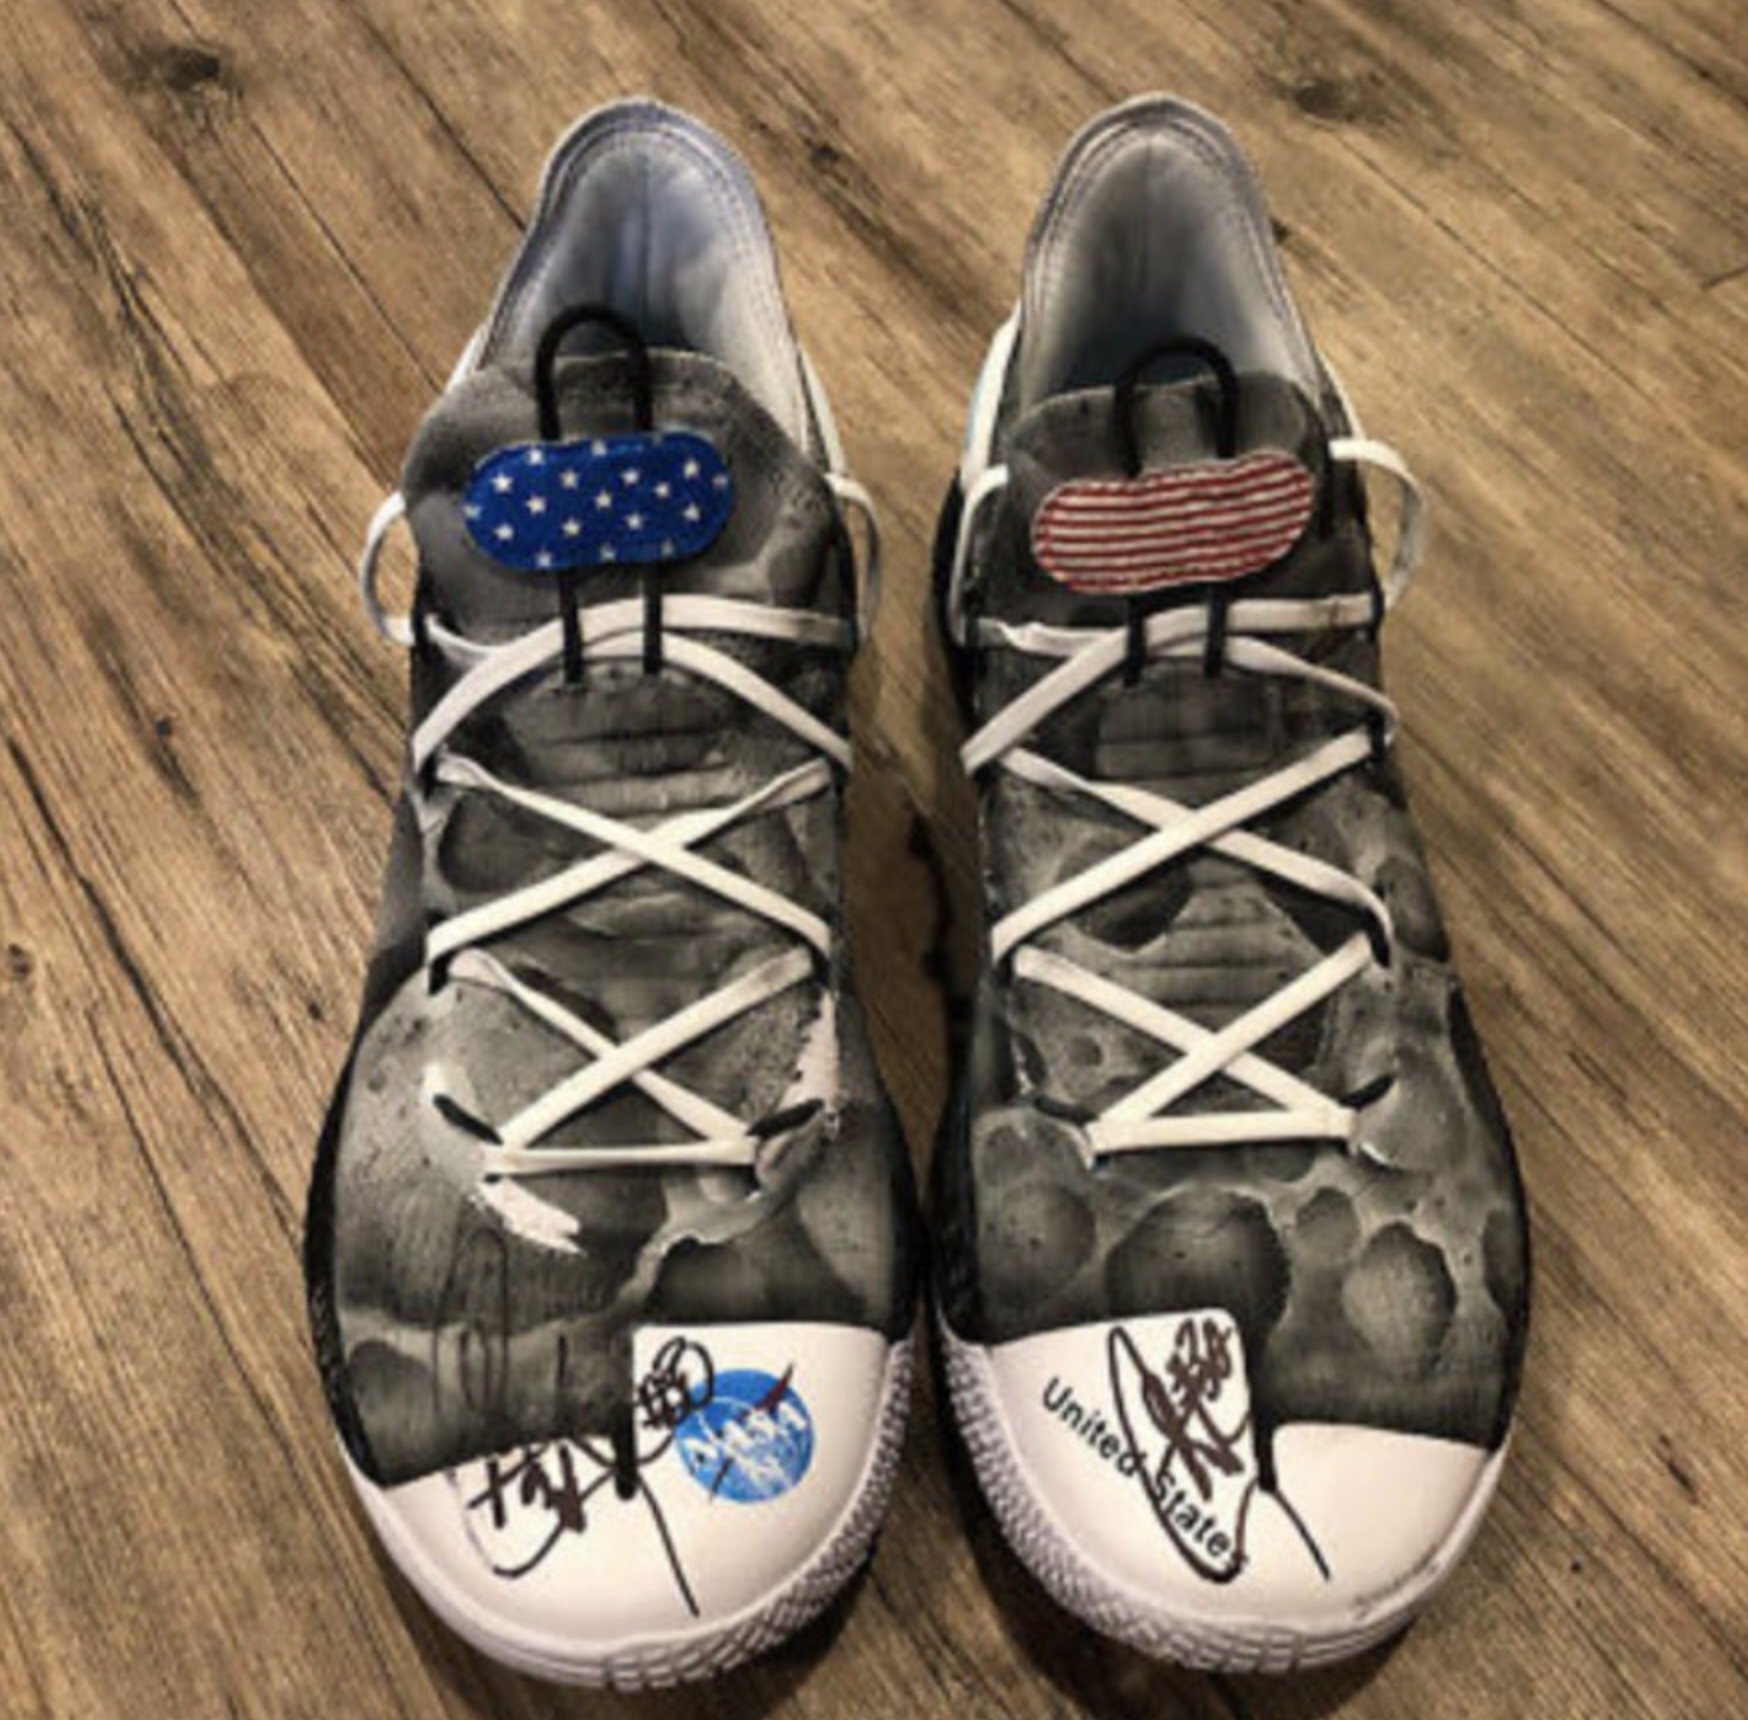 Game-Worn 'Moon Landing' Shoes Sell 